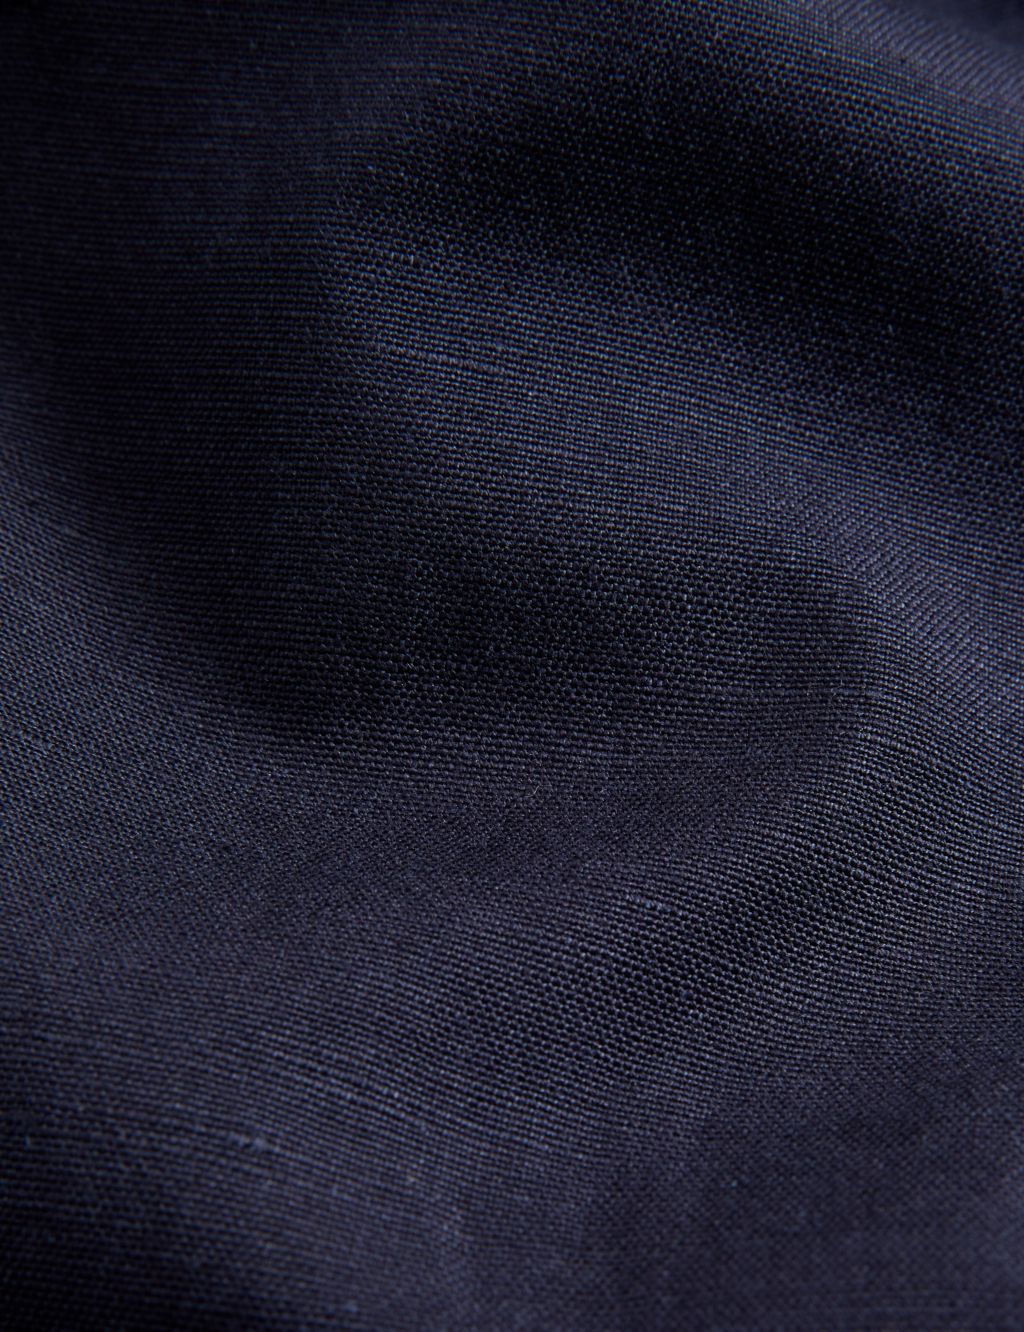 Tailored Fit Italian Silk And Linen Jacket image 7